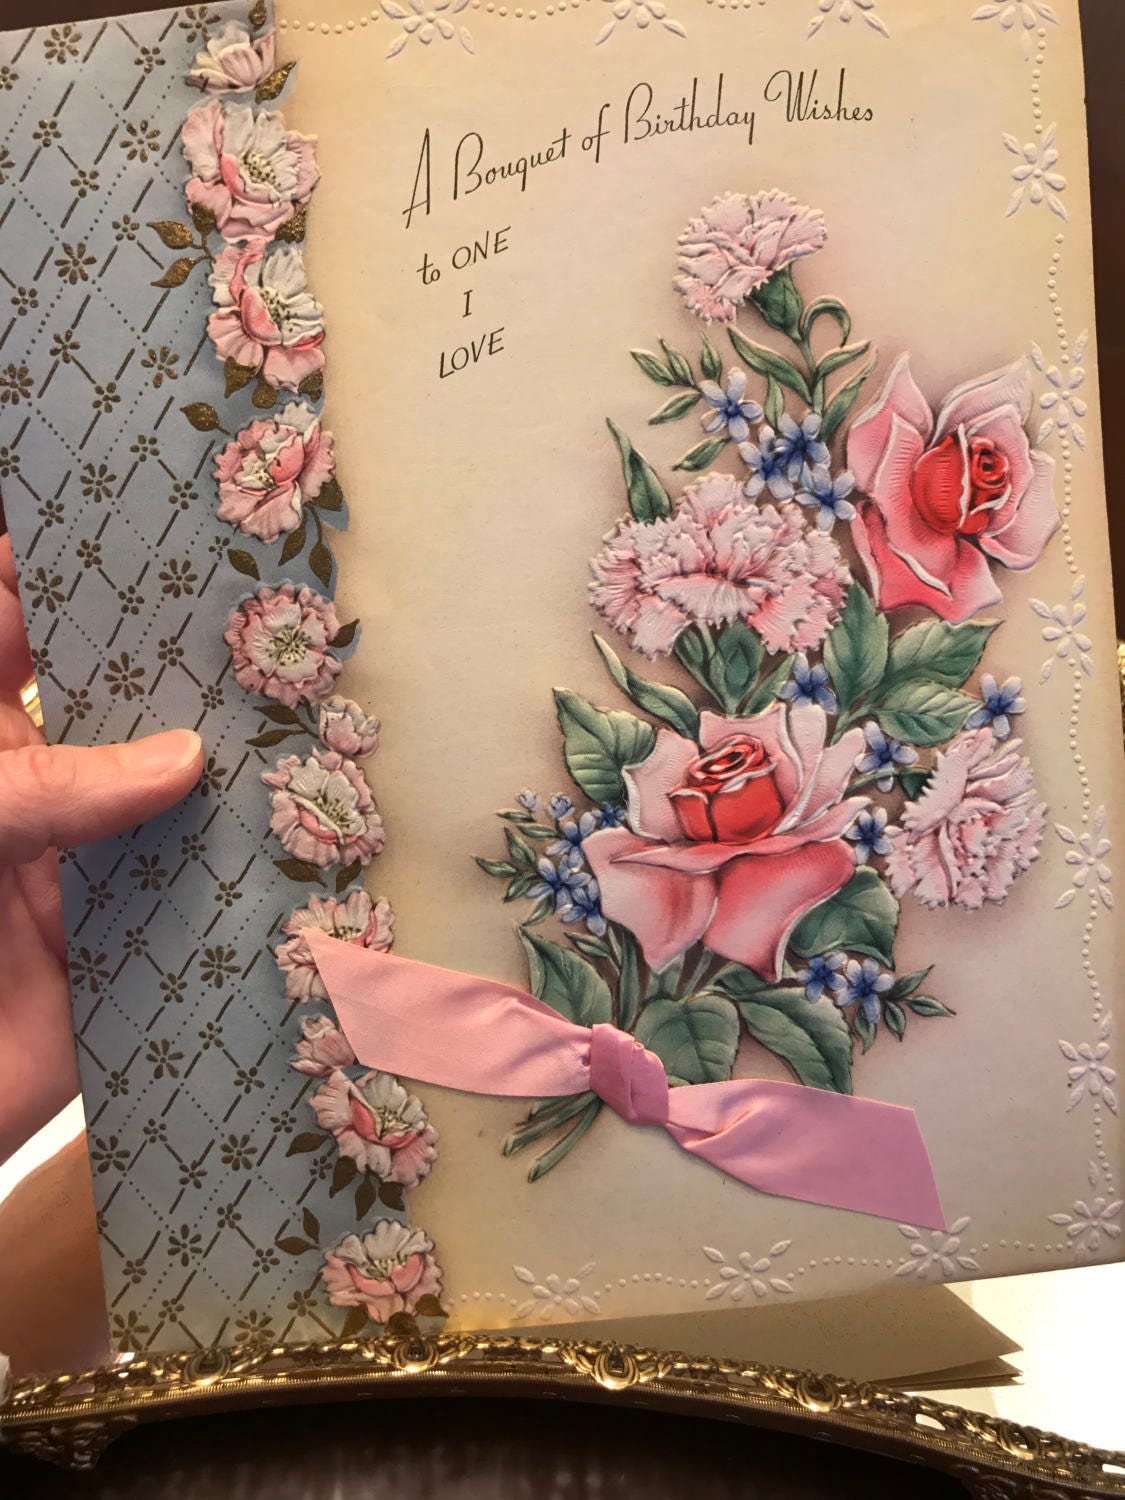 Happy Birthday Card with a Large Bouquet of Roses